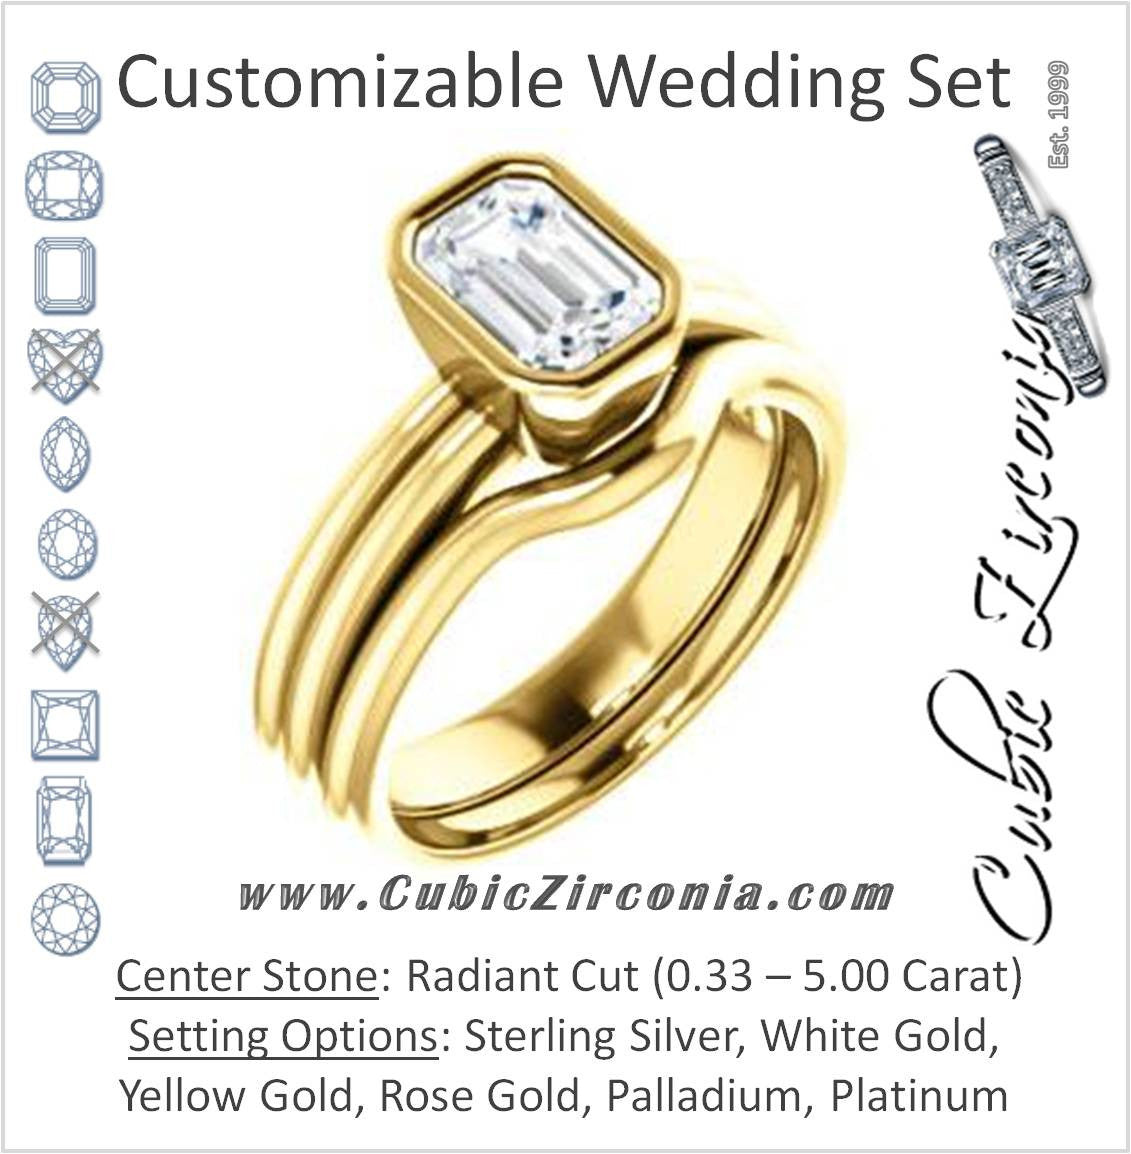 CZ Wedding Set, featuring The Stacie engagement ring (Customizable Bezel-set Radiant Cut Solitaire with Grooved Band)